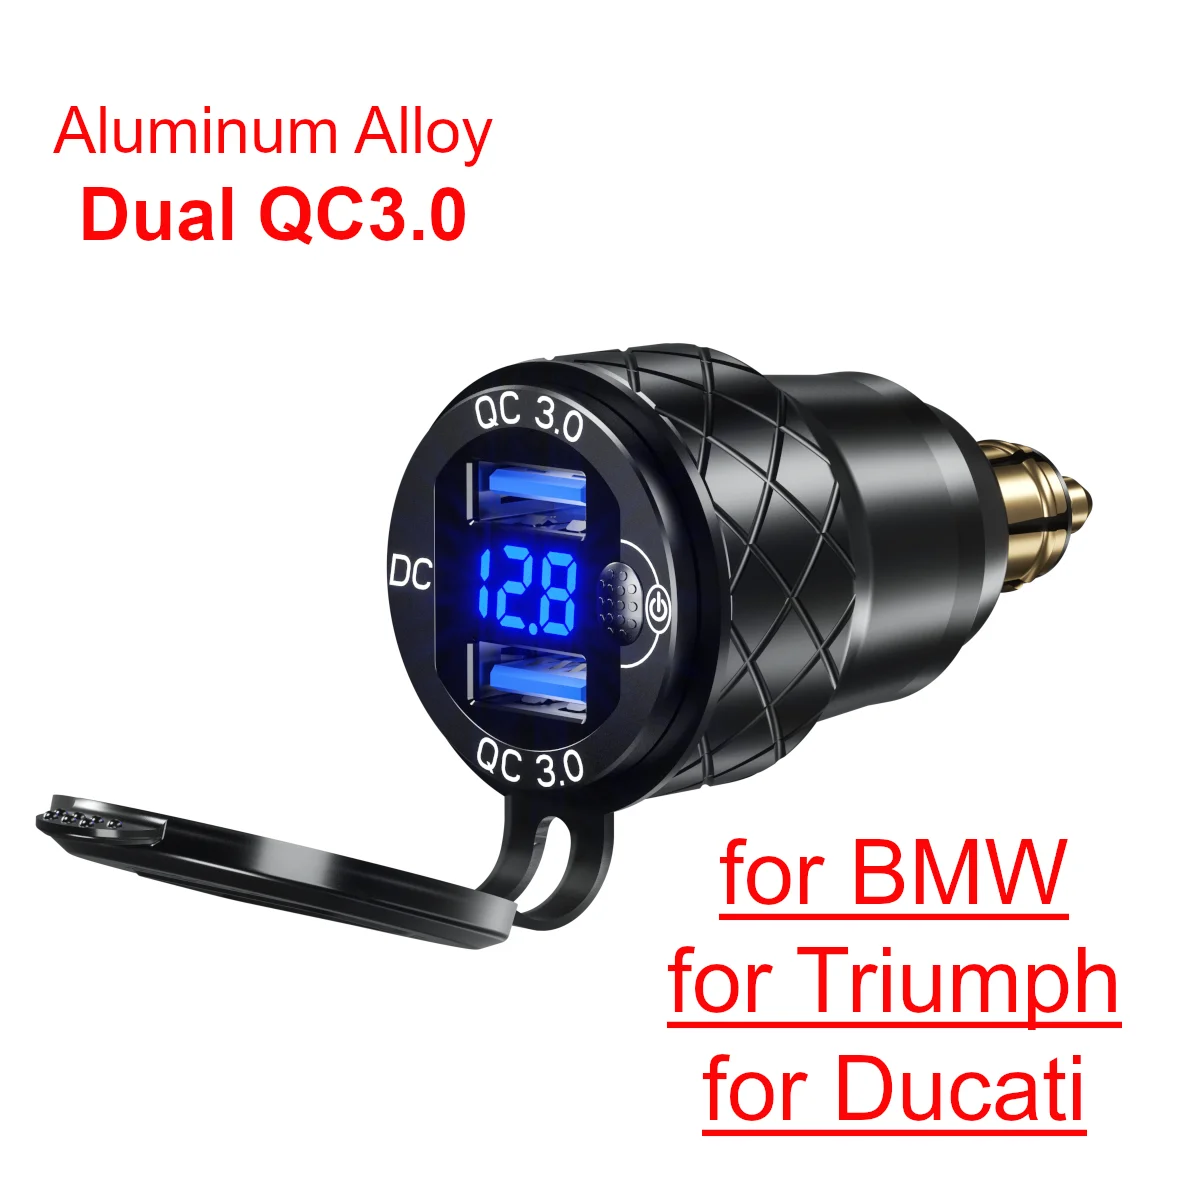 

Dual QC3.0 USB Quick Charge Motorcycle Hella DIN Socket Power Adapter All Metal for BMW R1200GS R1200RT Triumph Tiger Ducati